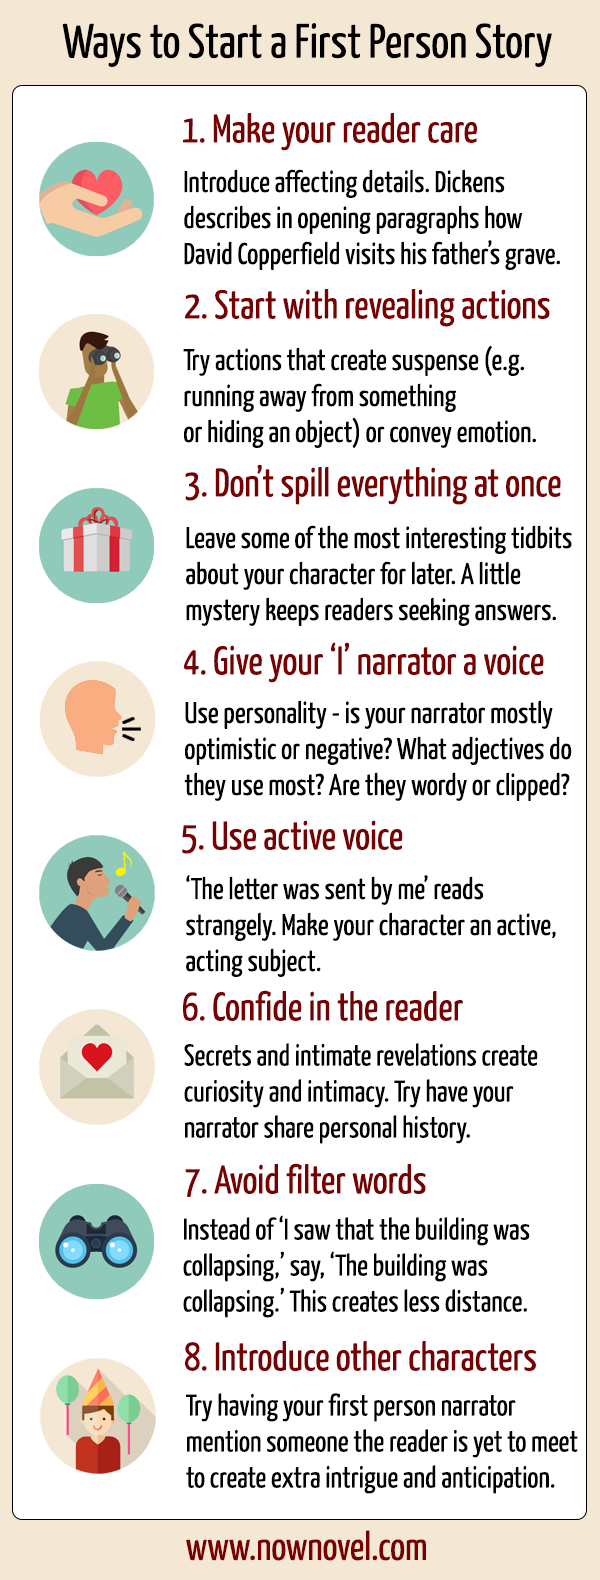 How to start a first person story - infographic | Now Novel